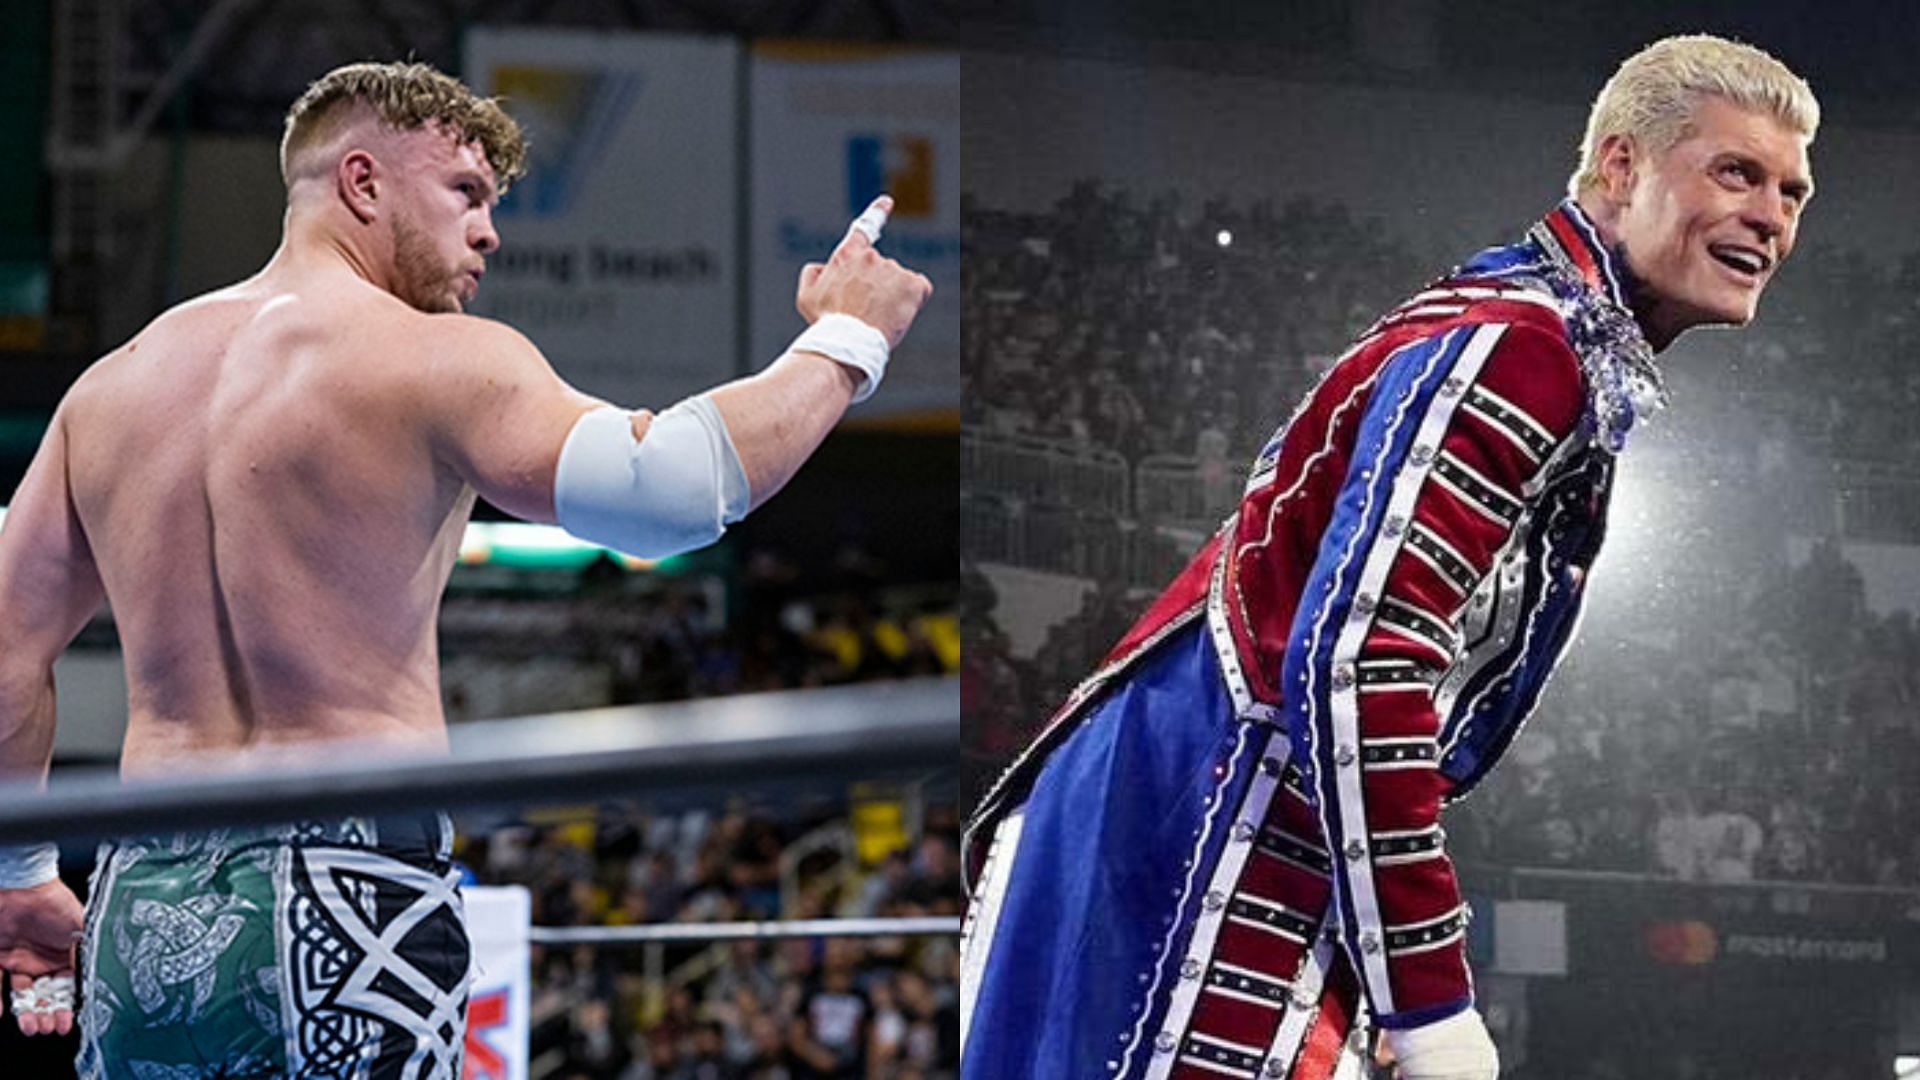 Will Ospreay (left) will be competing at AEW All In